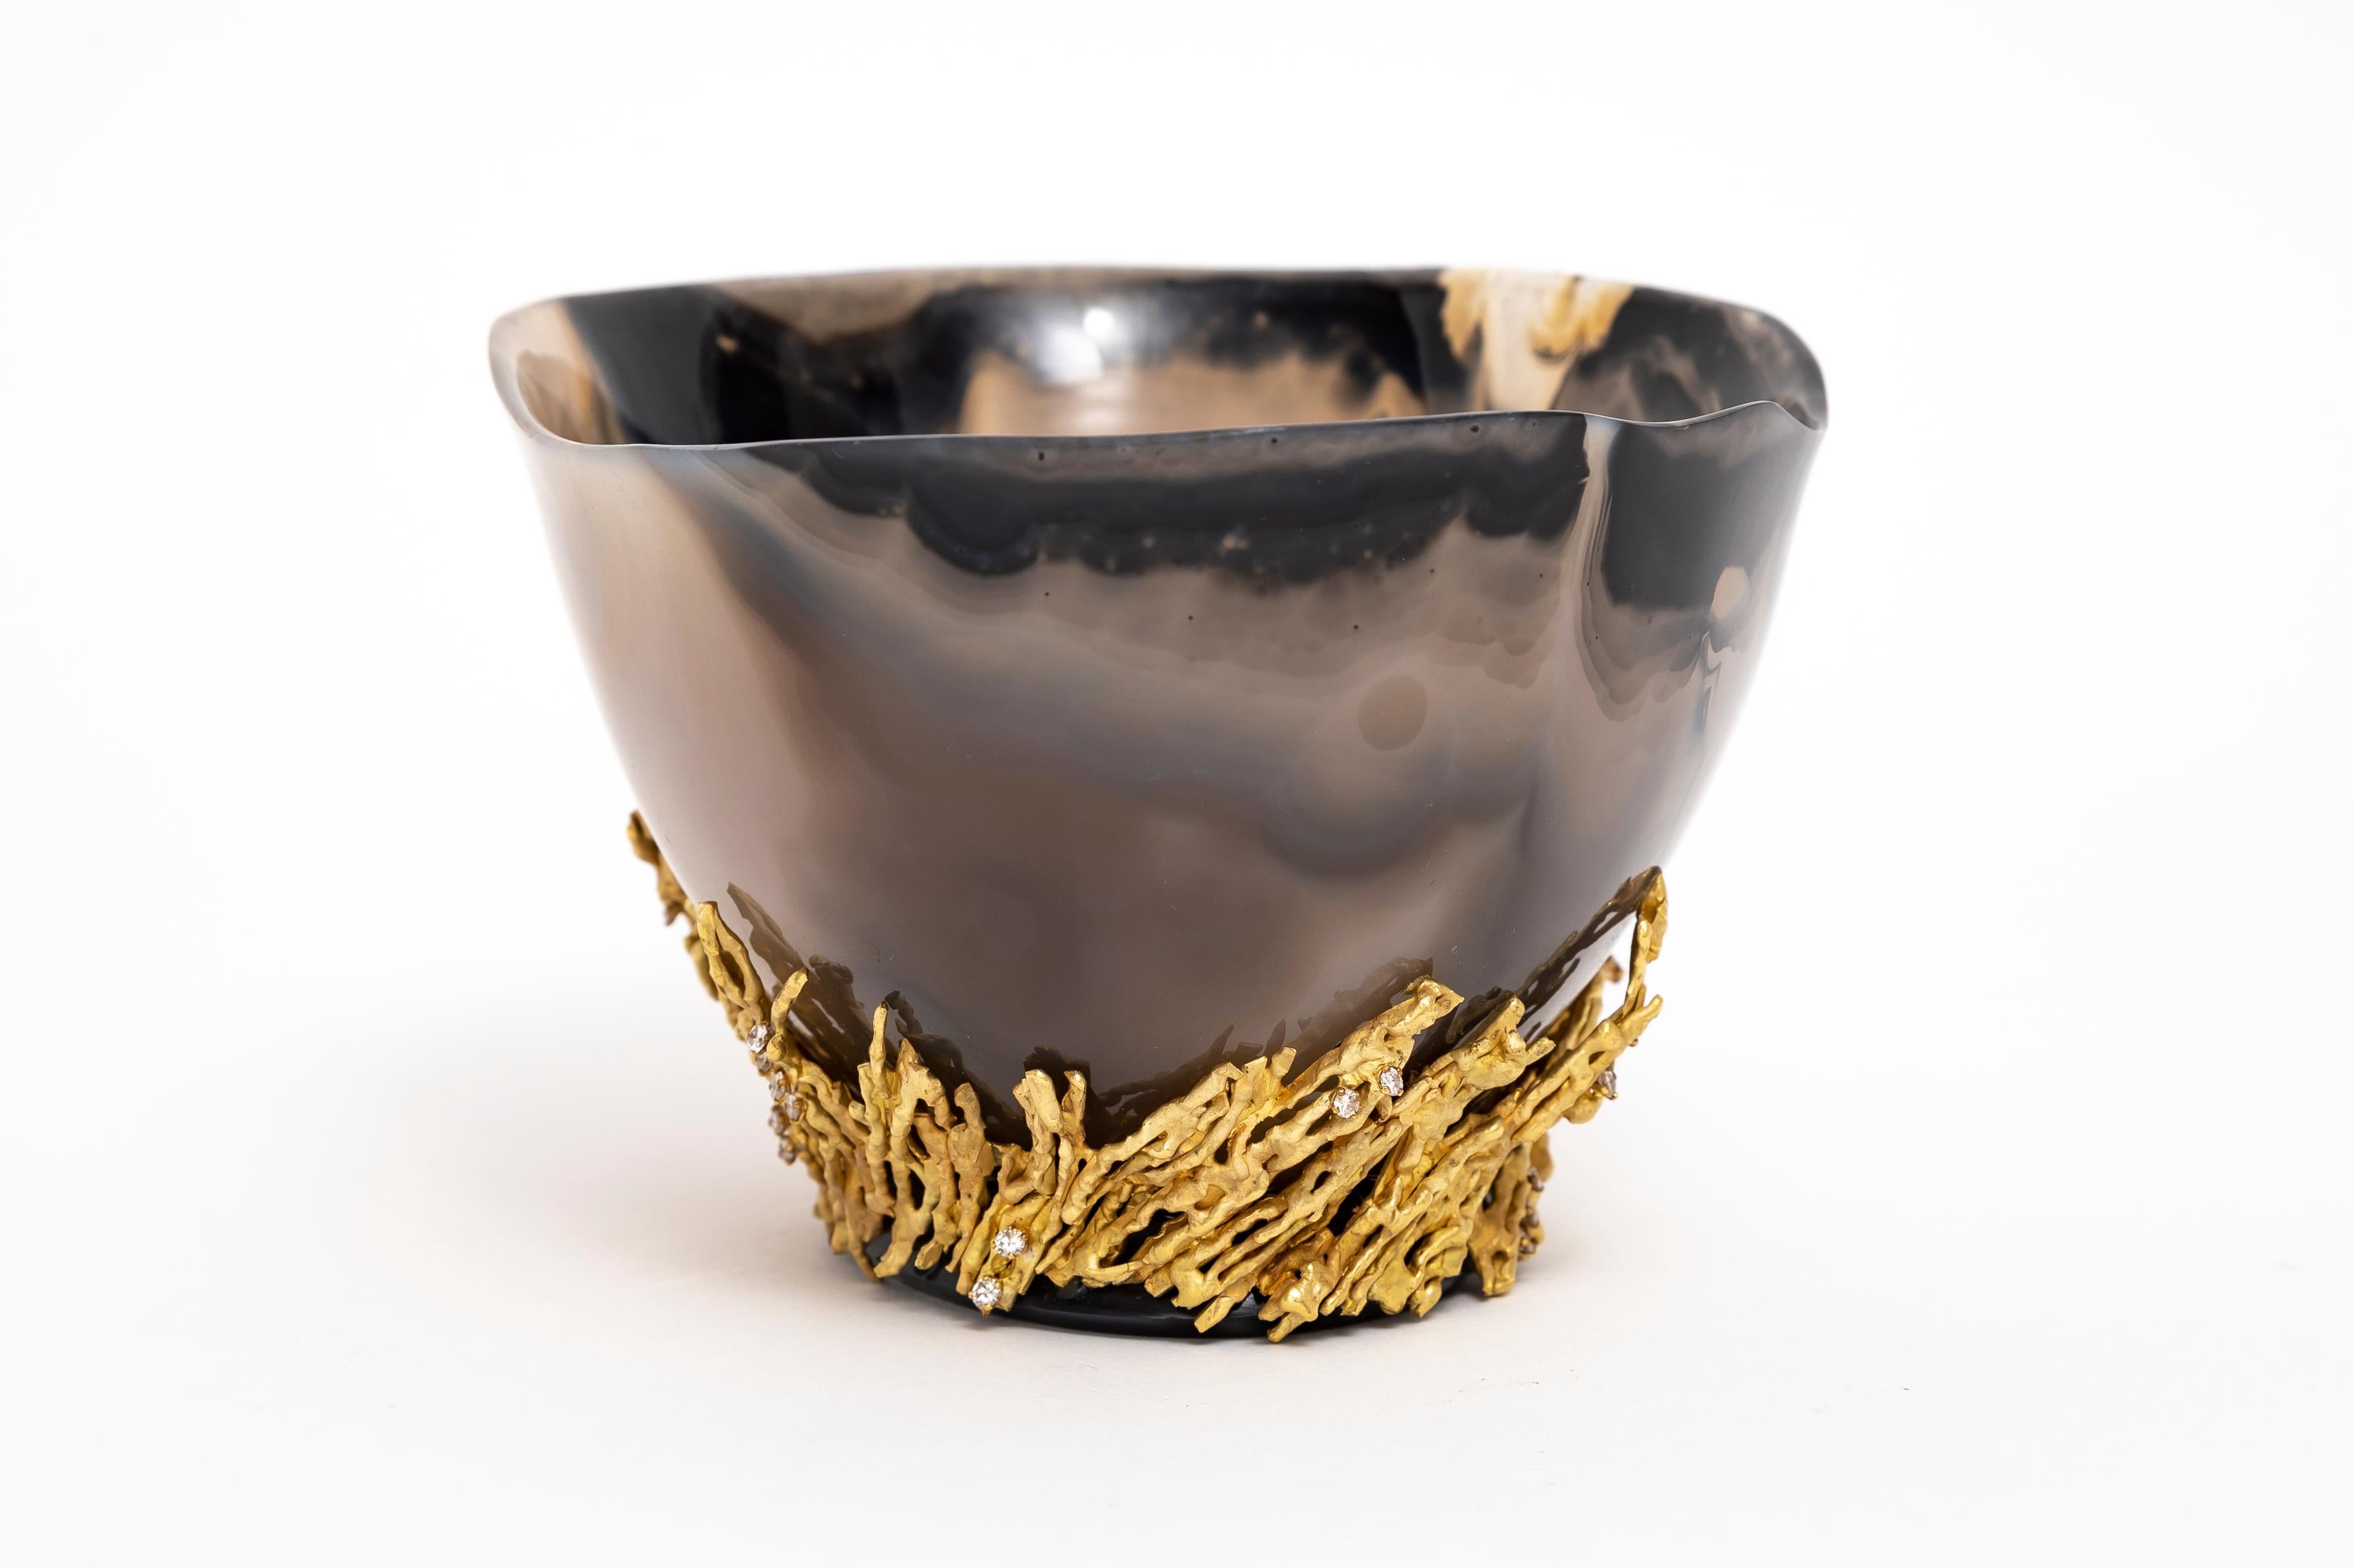 Polished An Incredible Chaumet Paris Gold & Diamond Mounted Carved Agate Bowl For Sale